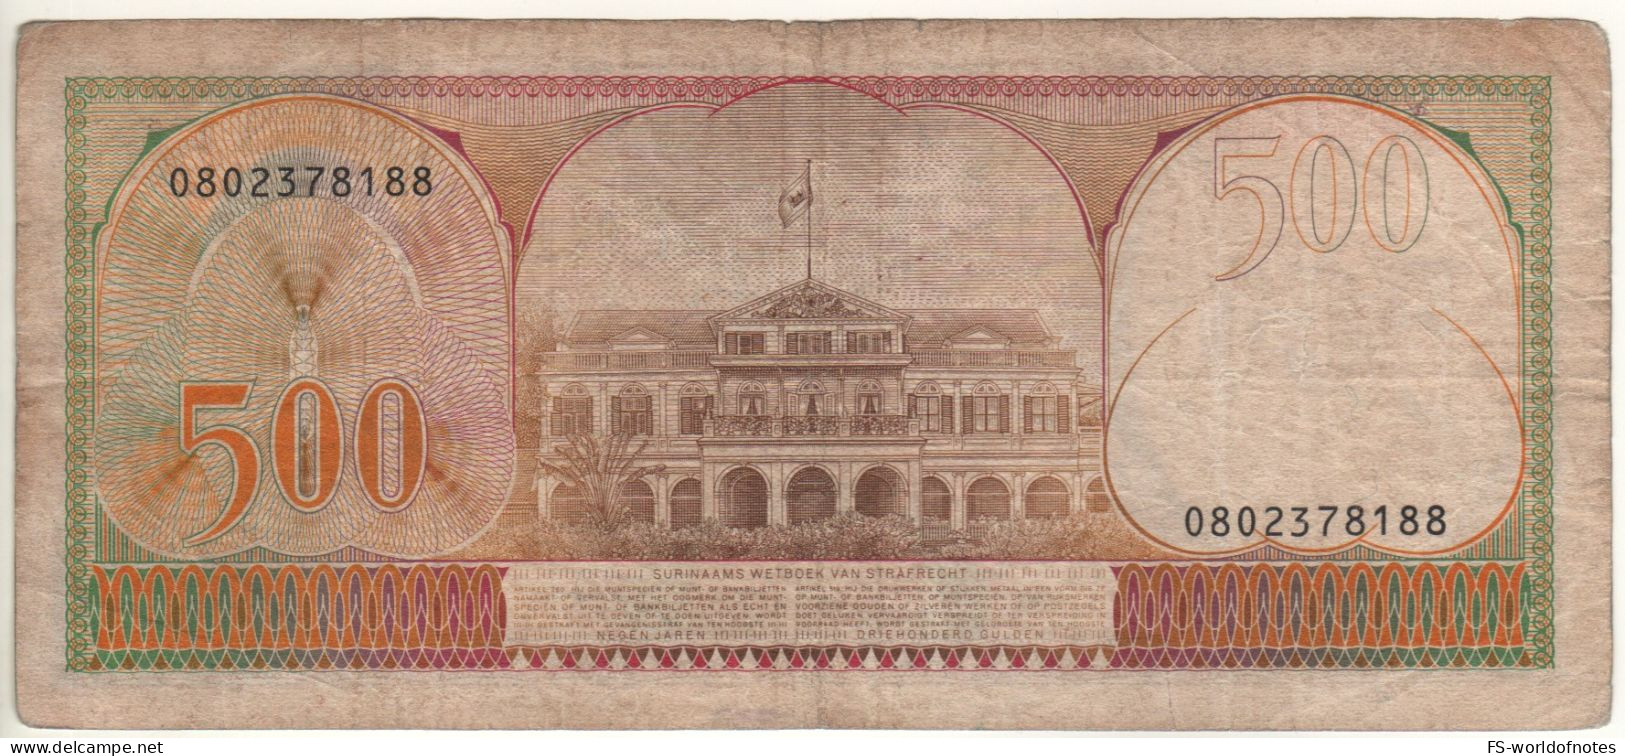 SURINAME   500  Gulden  P129    1982 ( Monument Of Revolt + People's Palace At Back )  UNC - Suriname